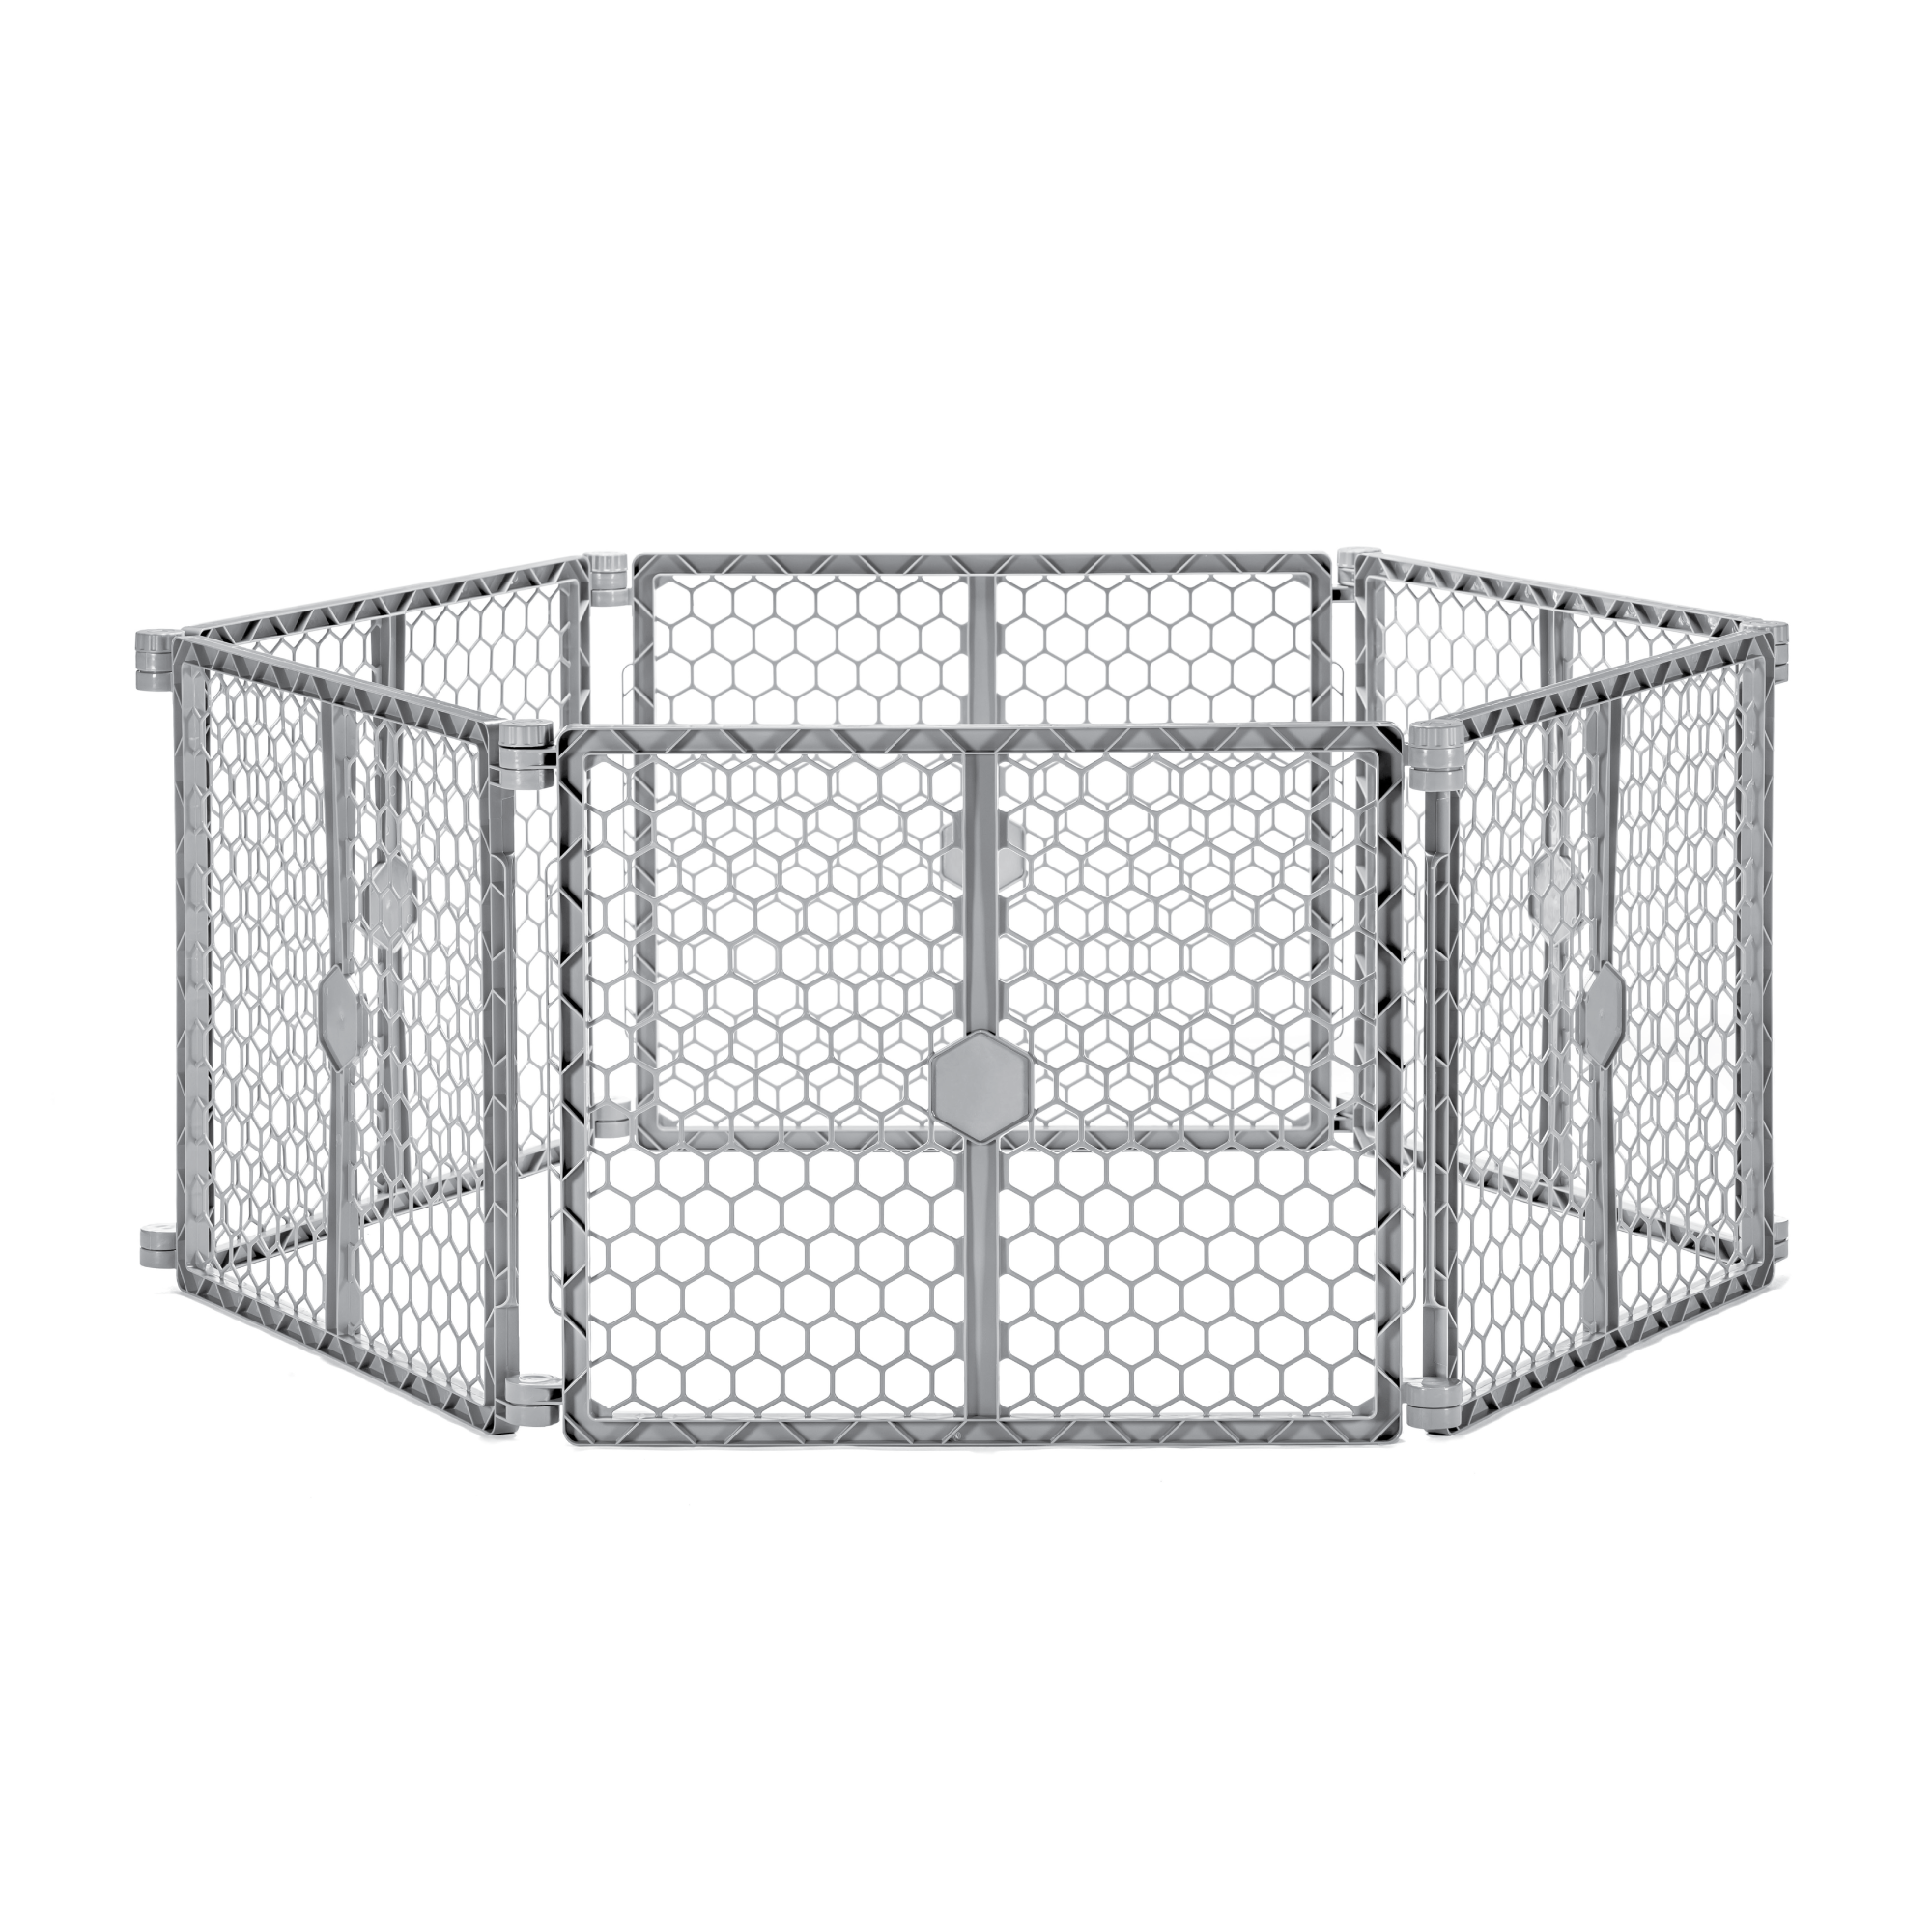 2-in-1 Plastic Gate & Pet Pen on white background.